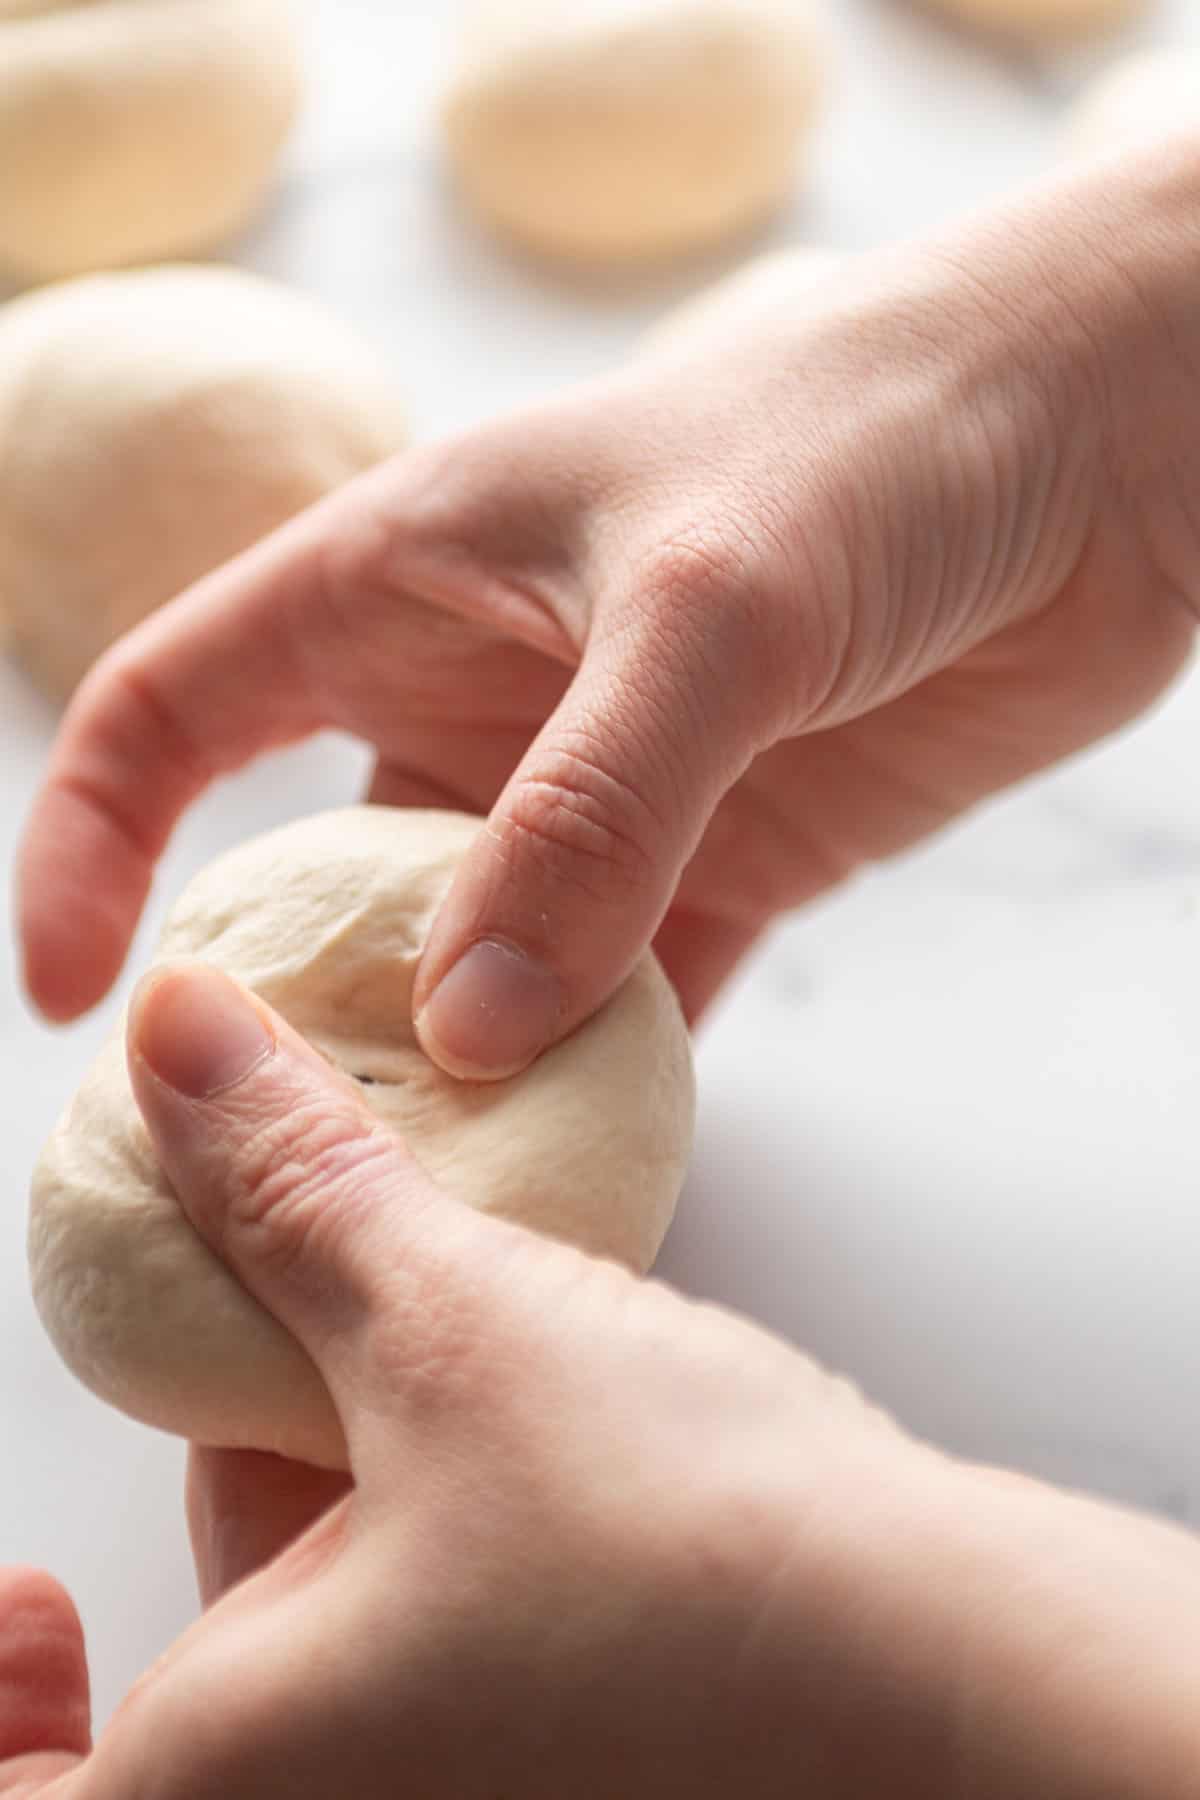 Two hands poking a hole in a small ball of dough.